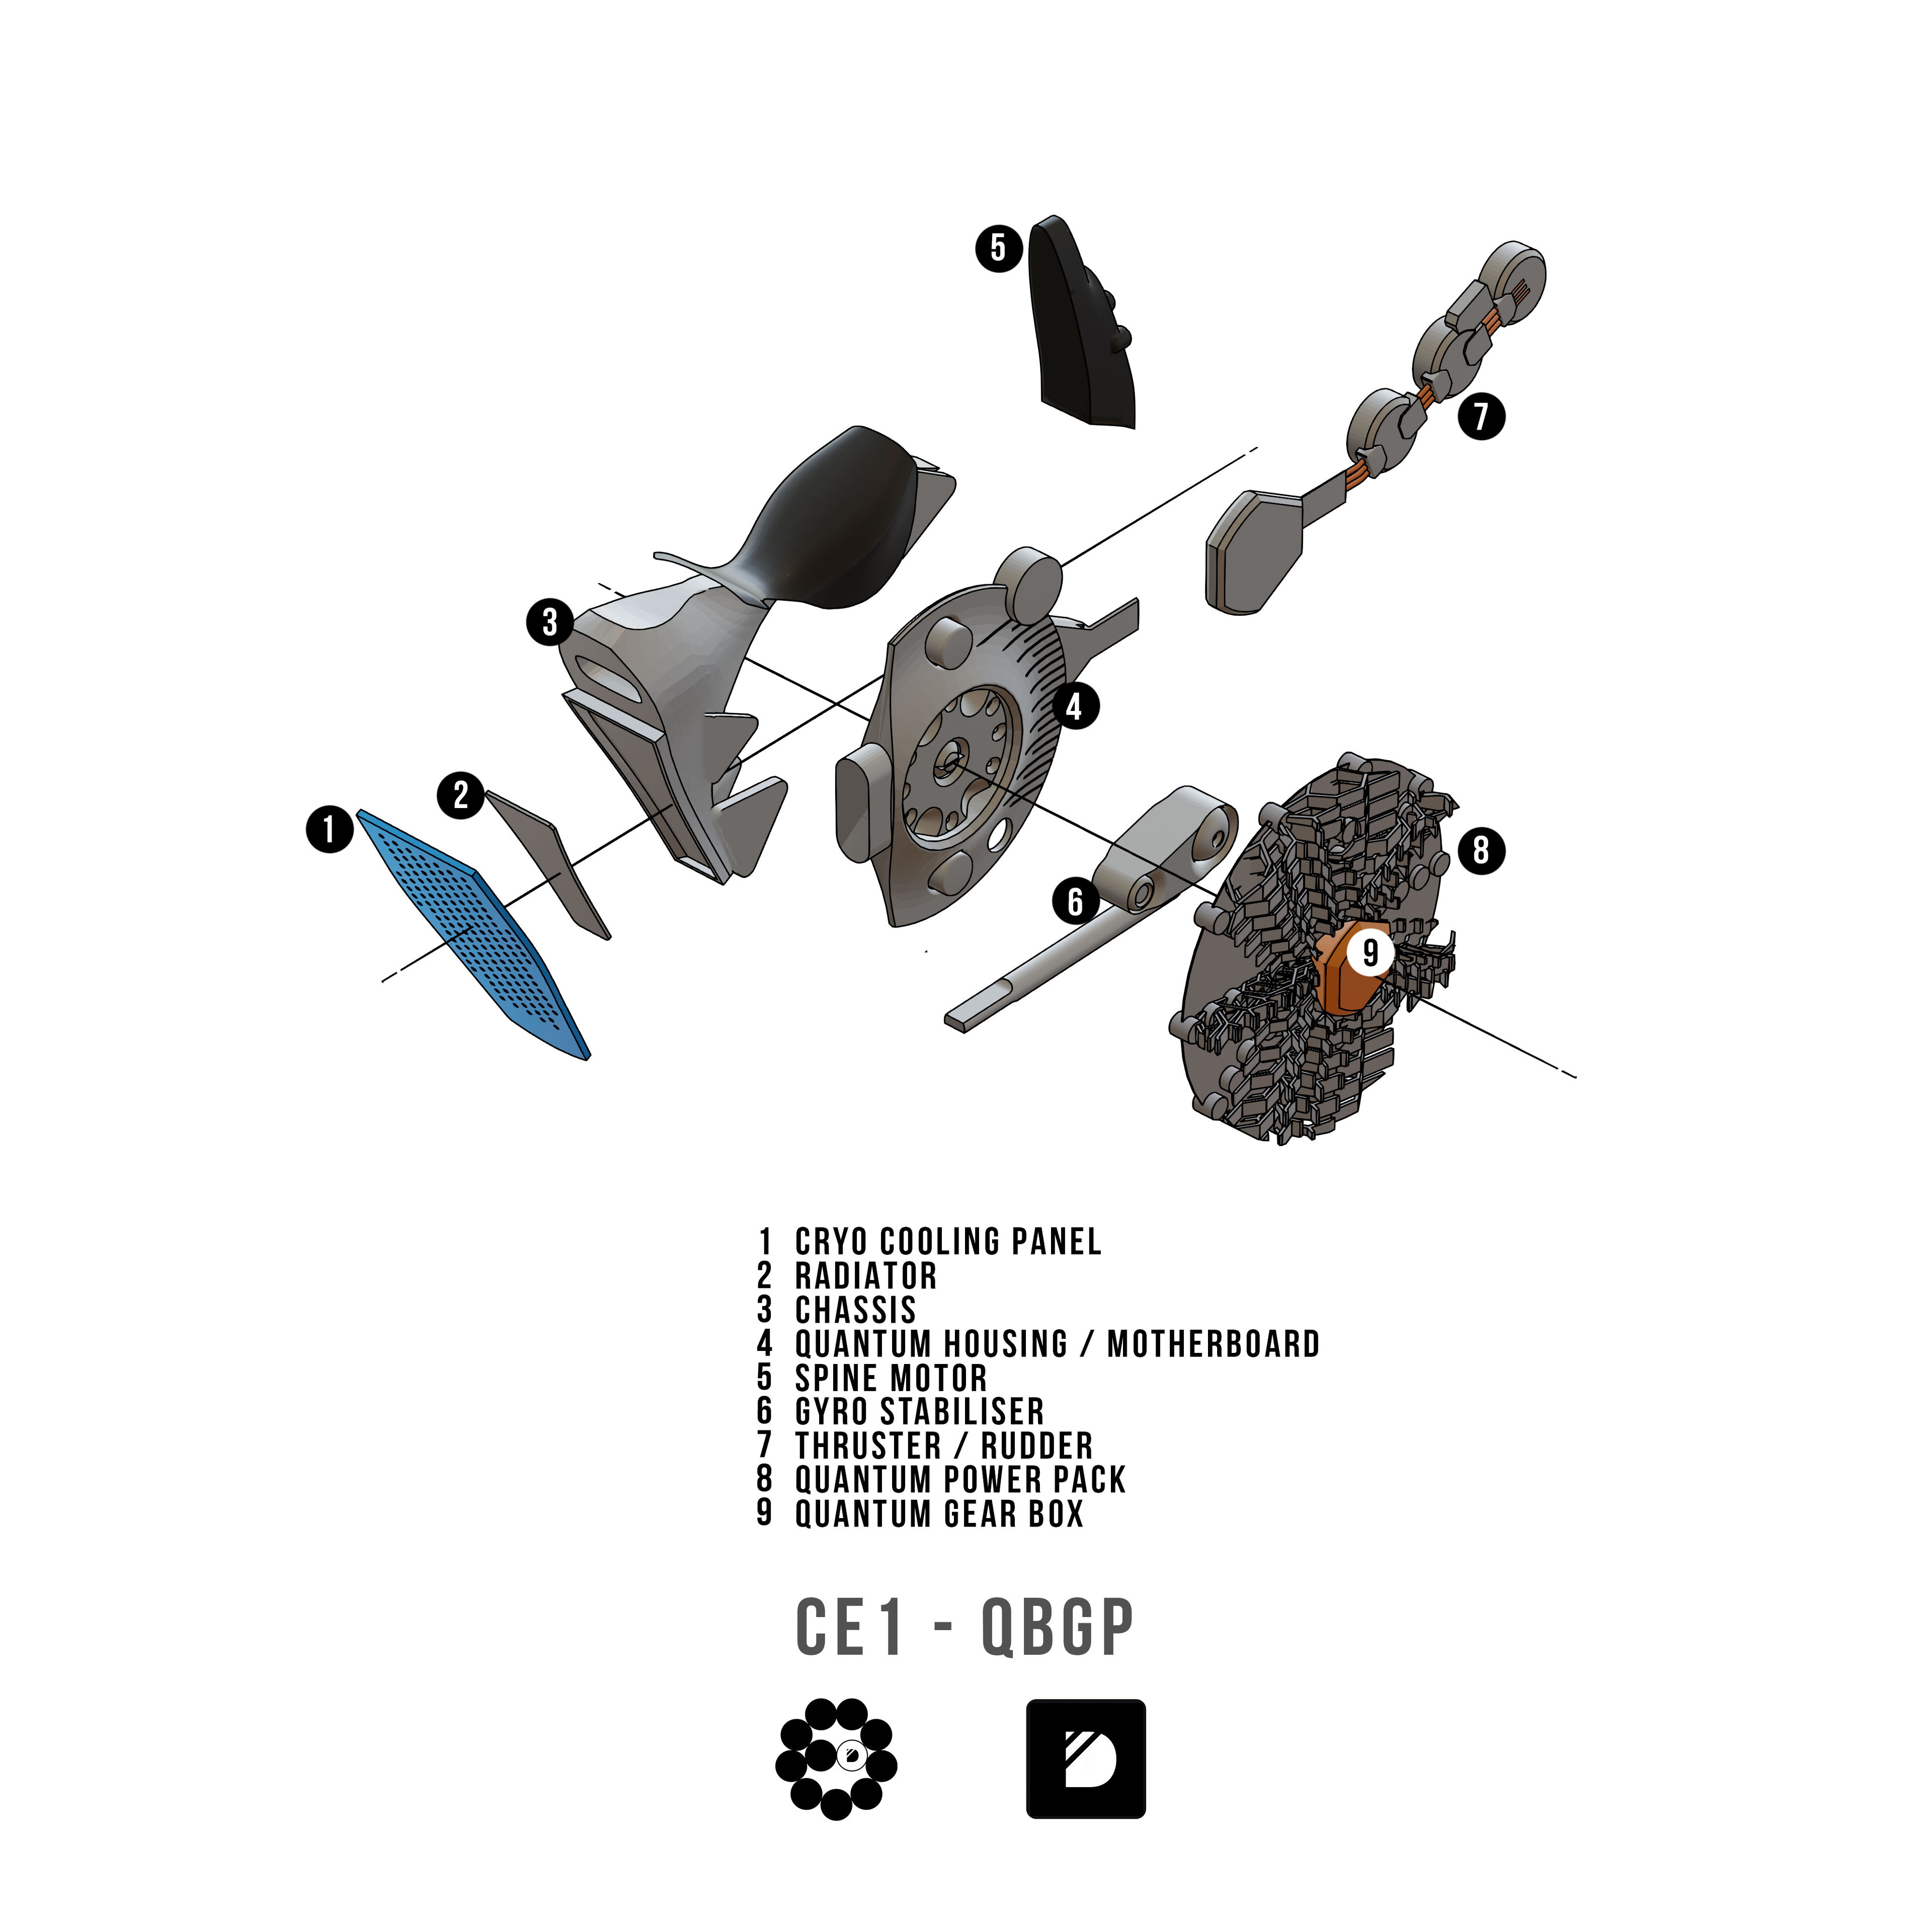 EXPLODED VIEW OF THE POWER UNIT